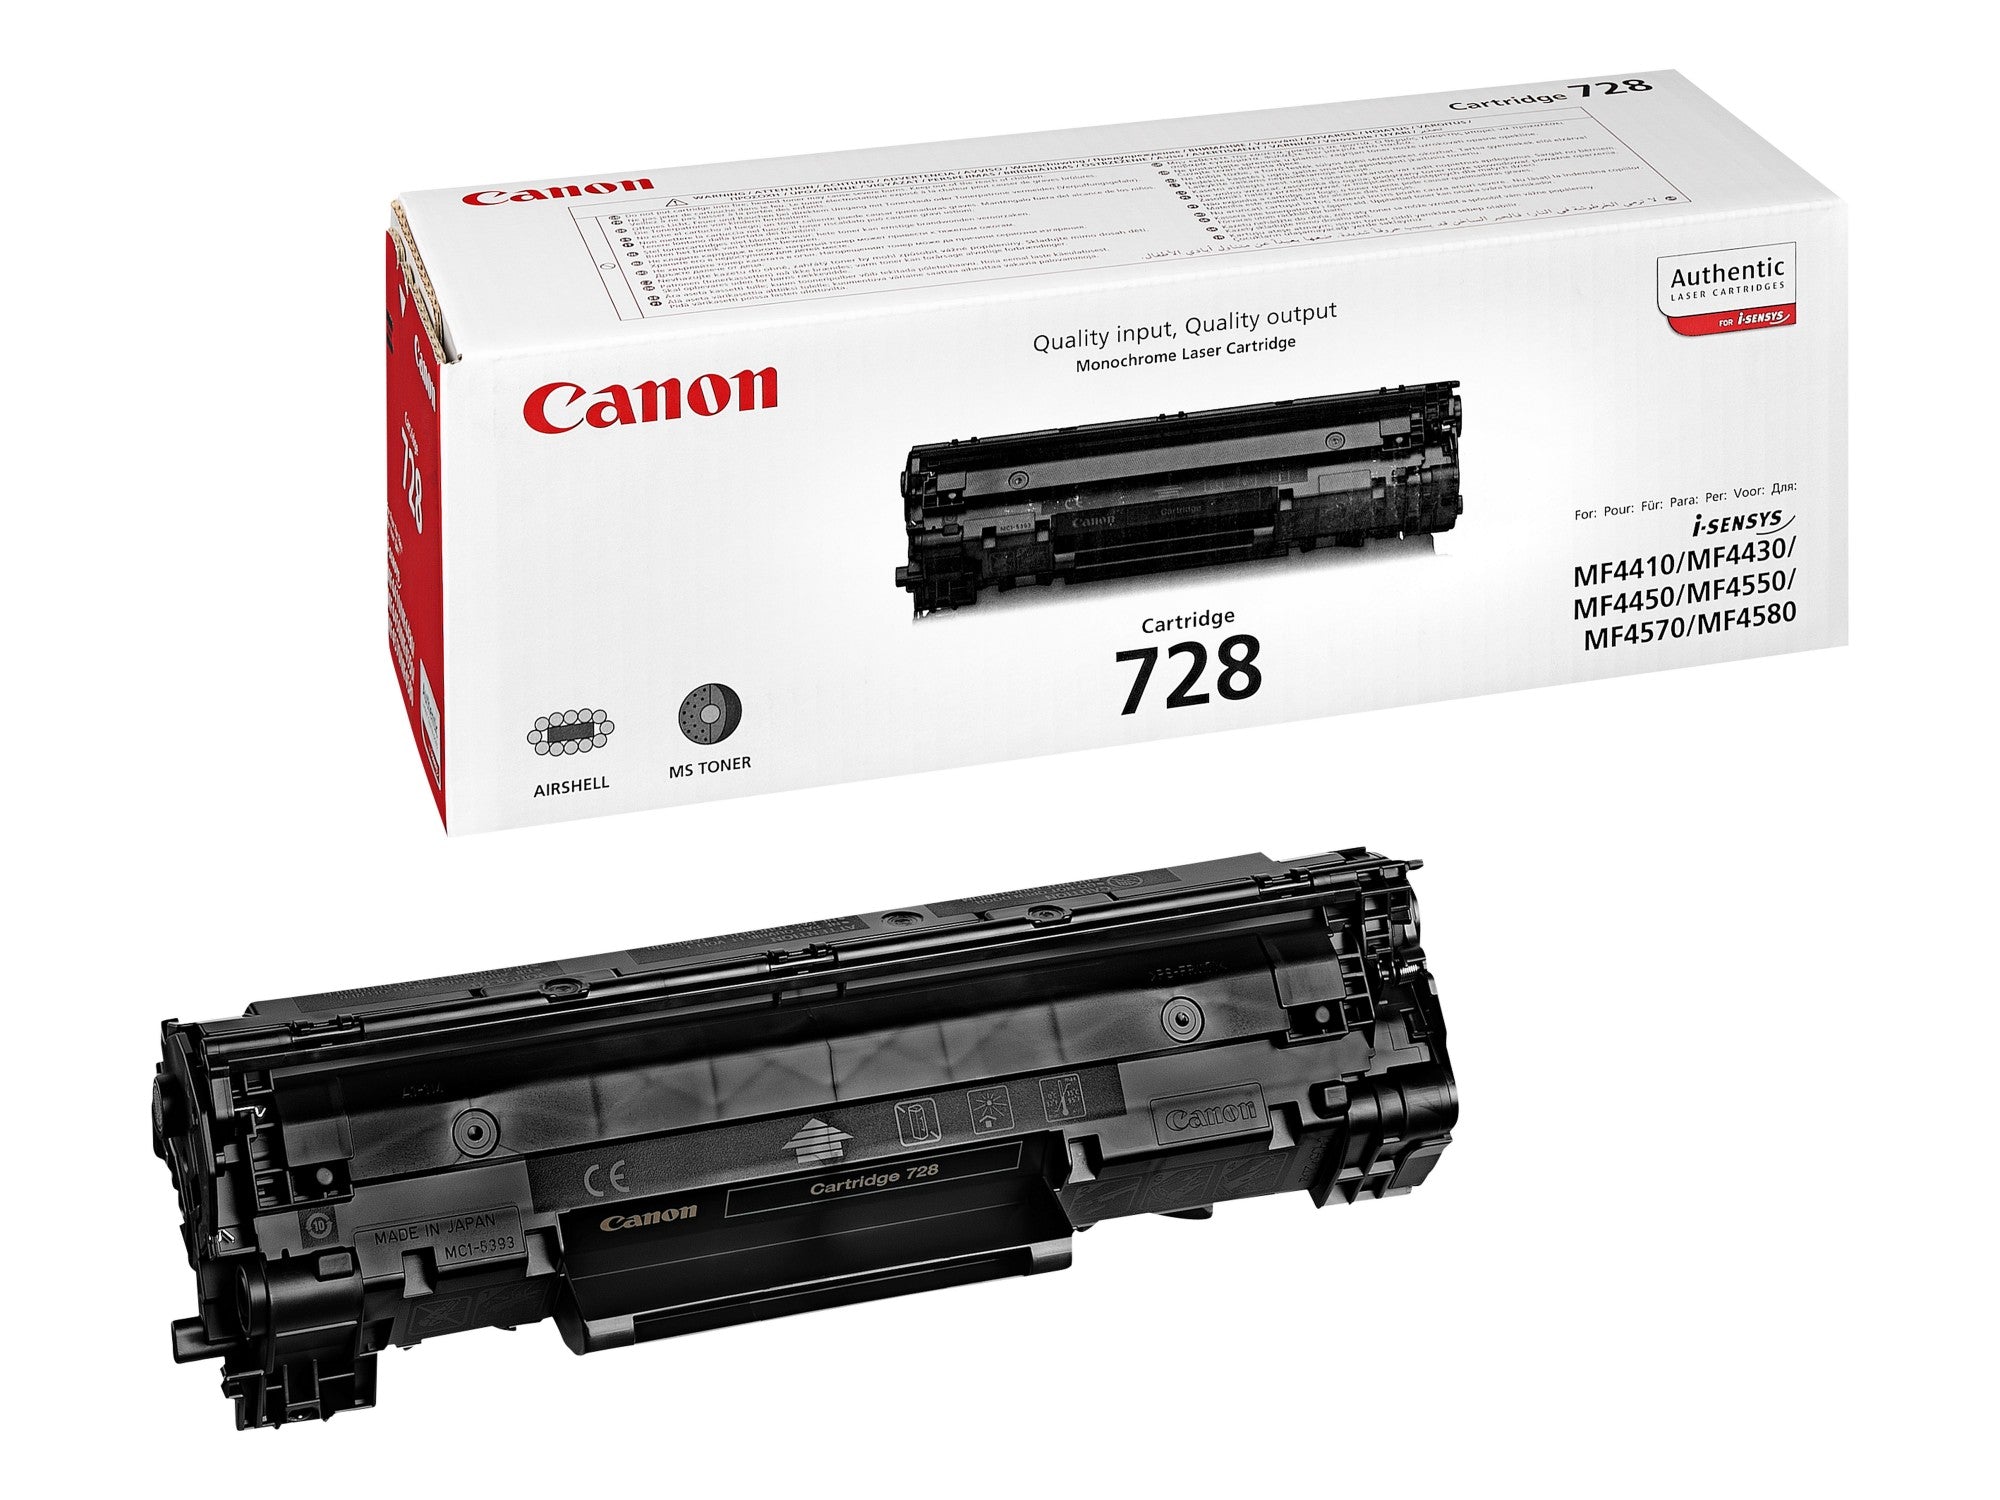 Canon 3500B002/728 Toner cartridge black, 2.1K pages ISO/IEC 19752 for Canon MF 4410